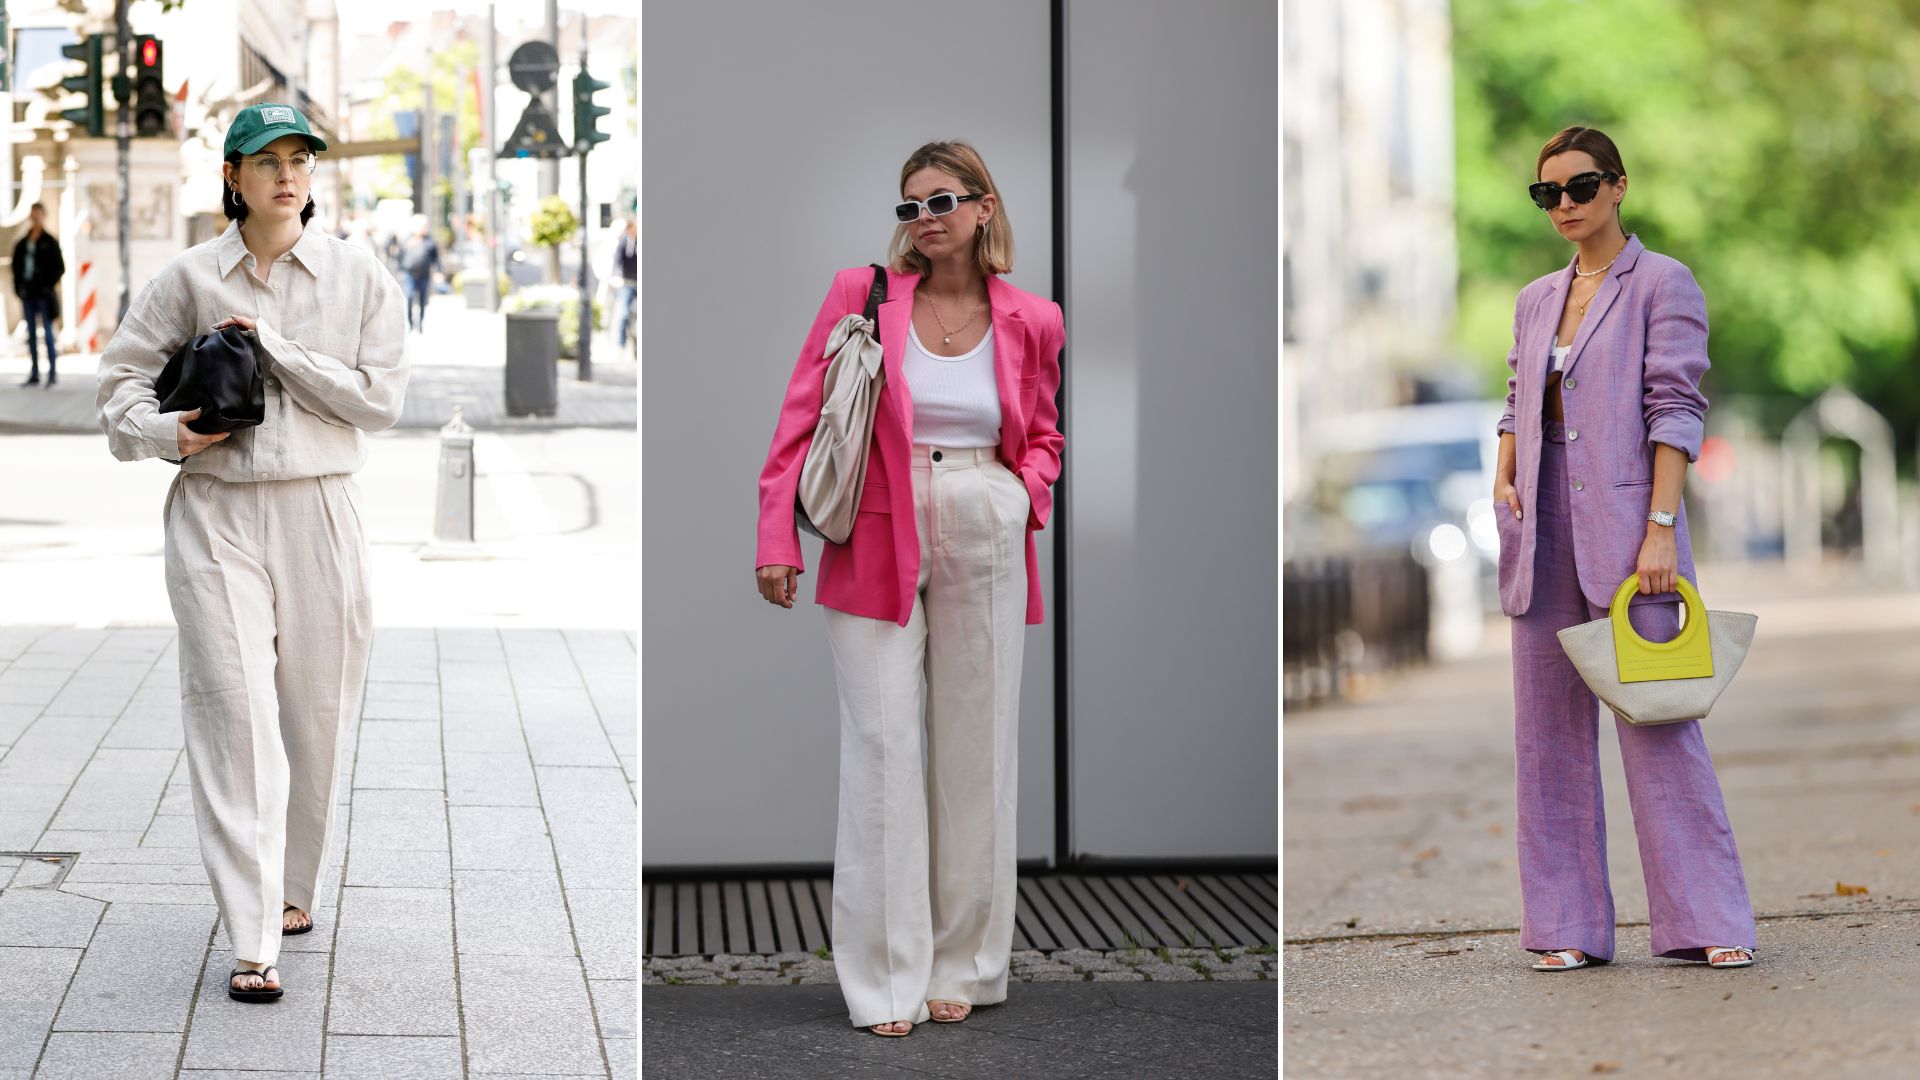 How to style linen pants for work this summer